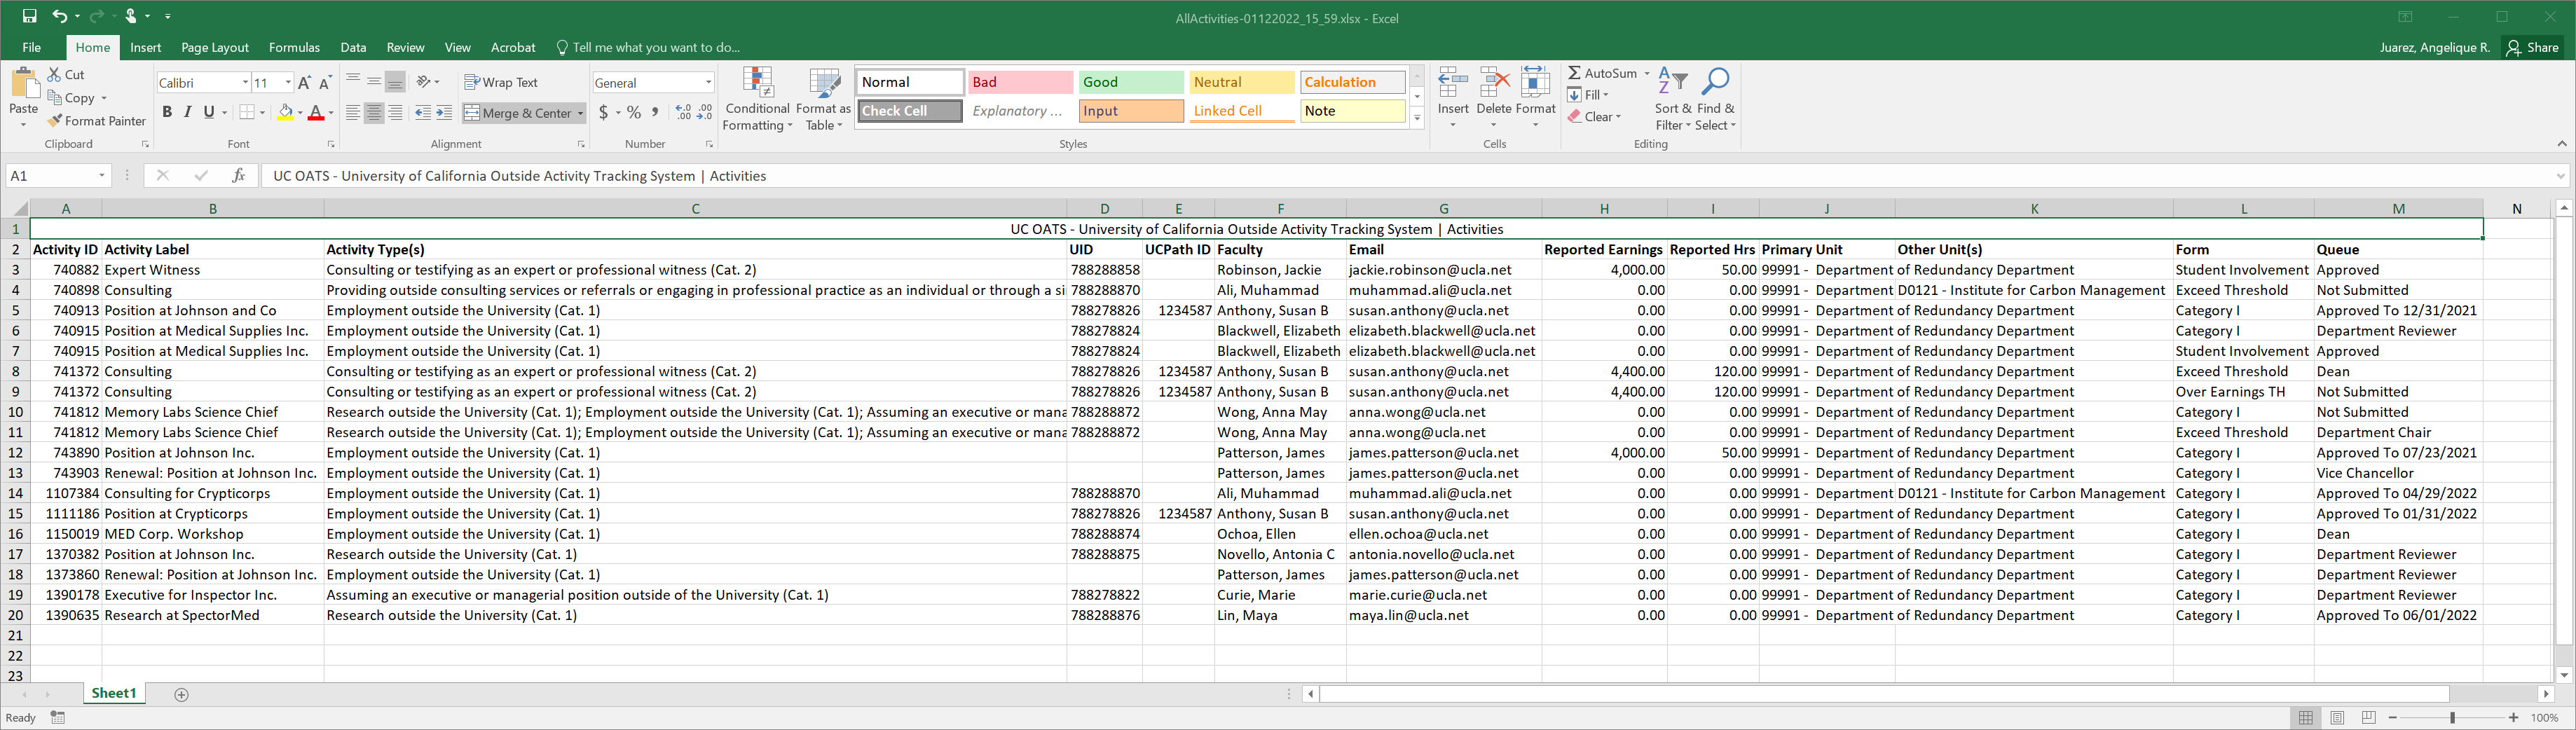 example of exporting data to a spreadsheet